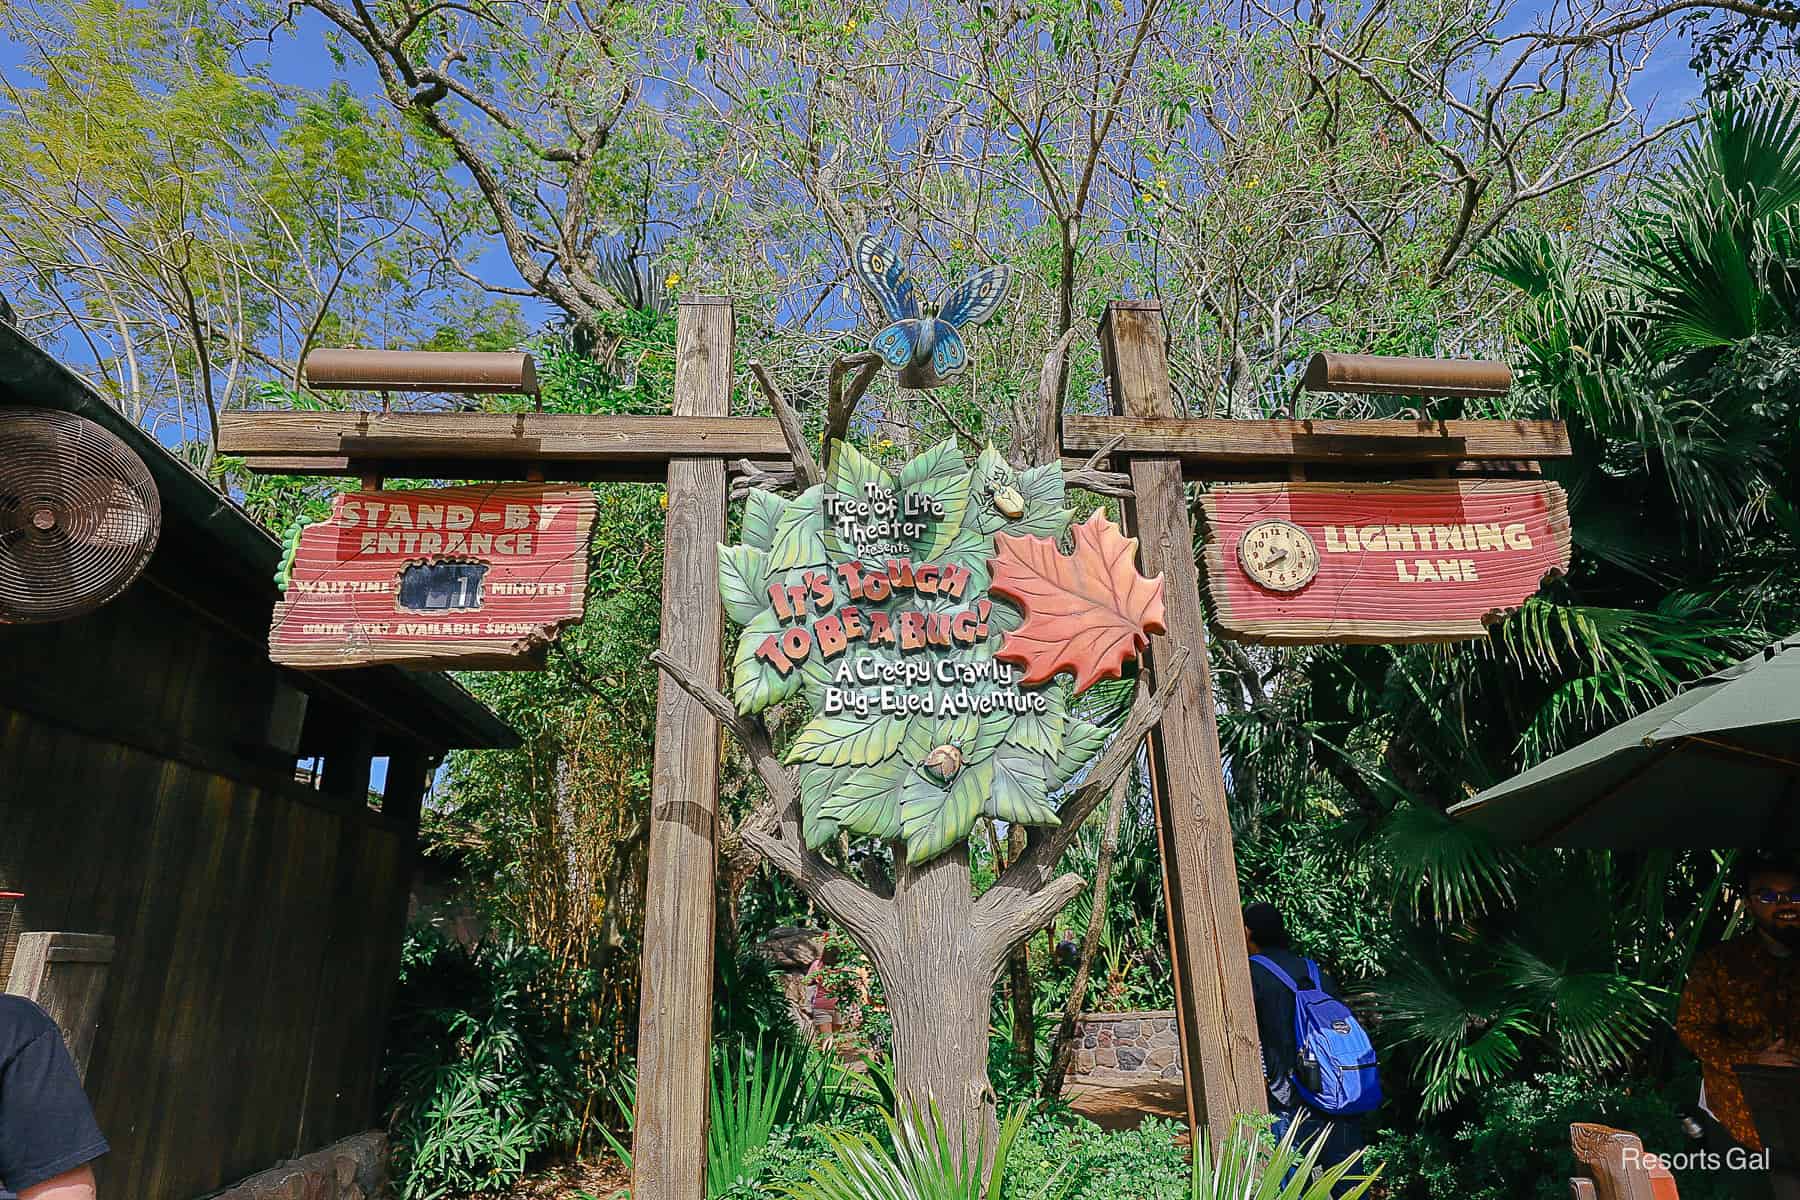 It’s Tough to Be a Bug! at Disney’s Animal Kingdom (A Resorts Gal Guide)